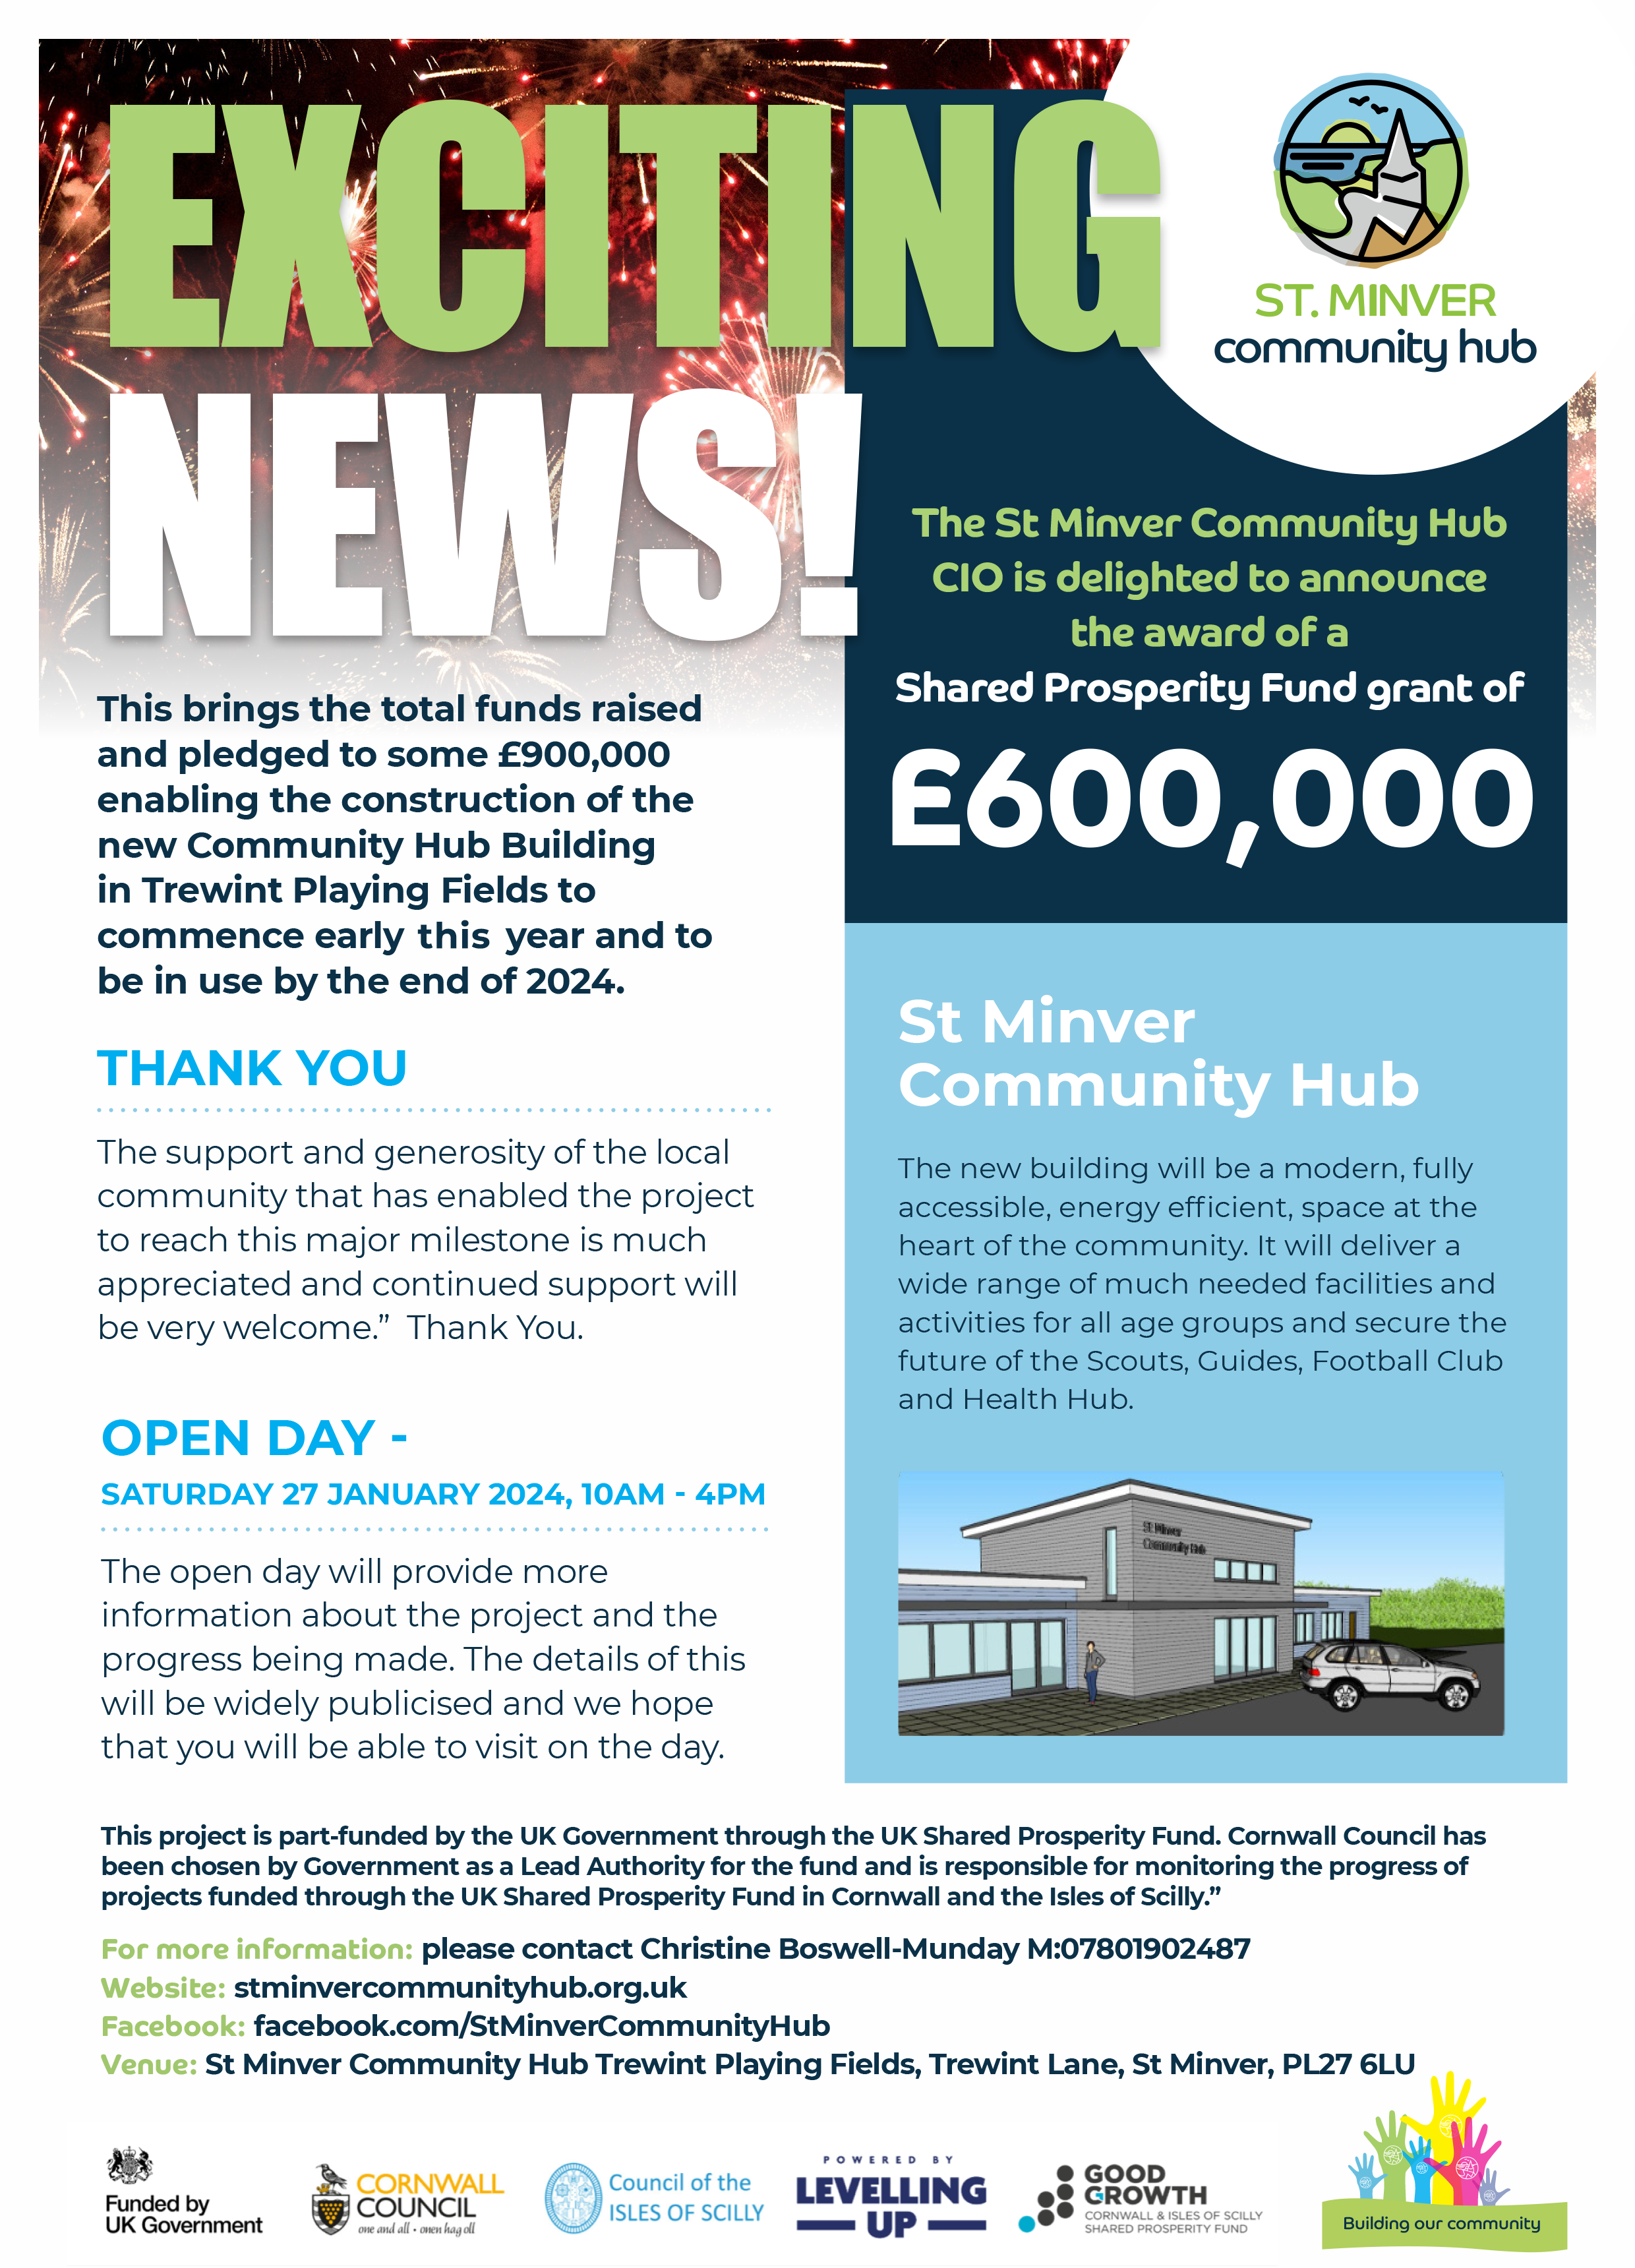 SMCH Exciting News - Open Day